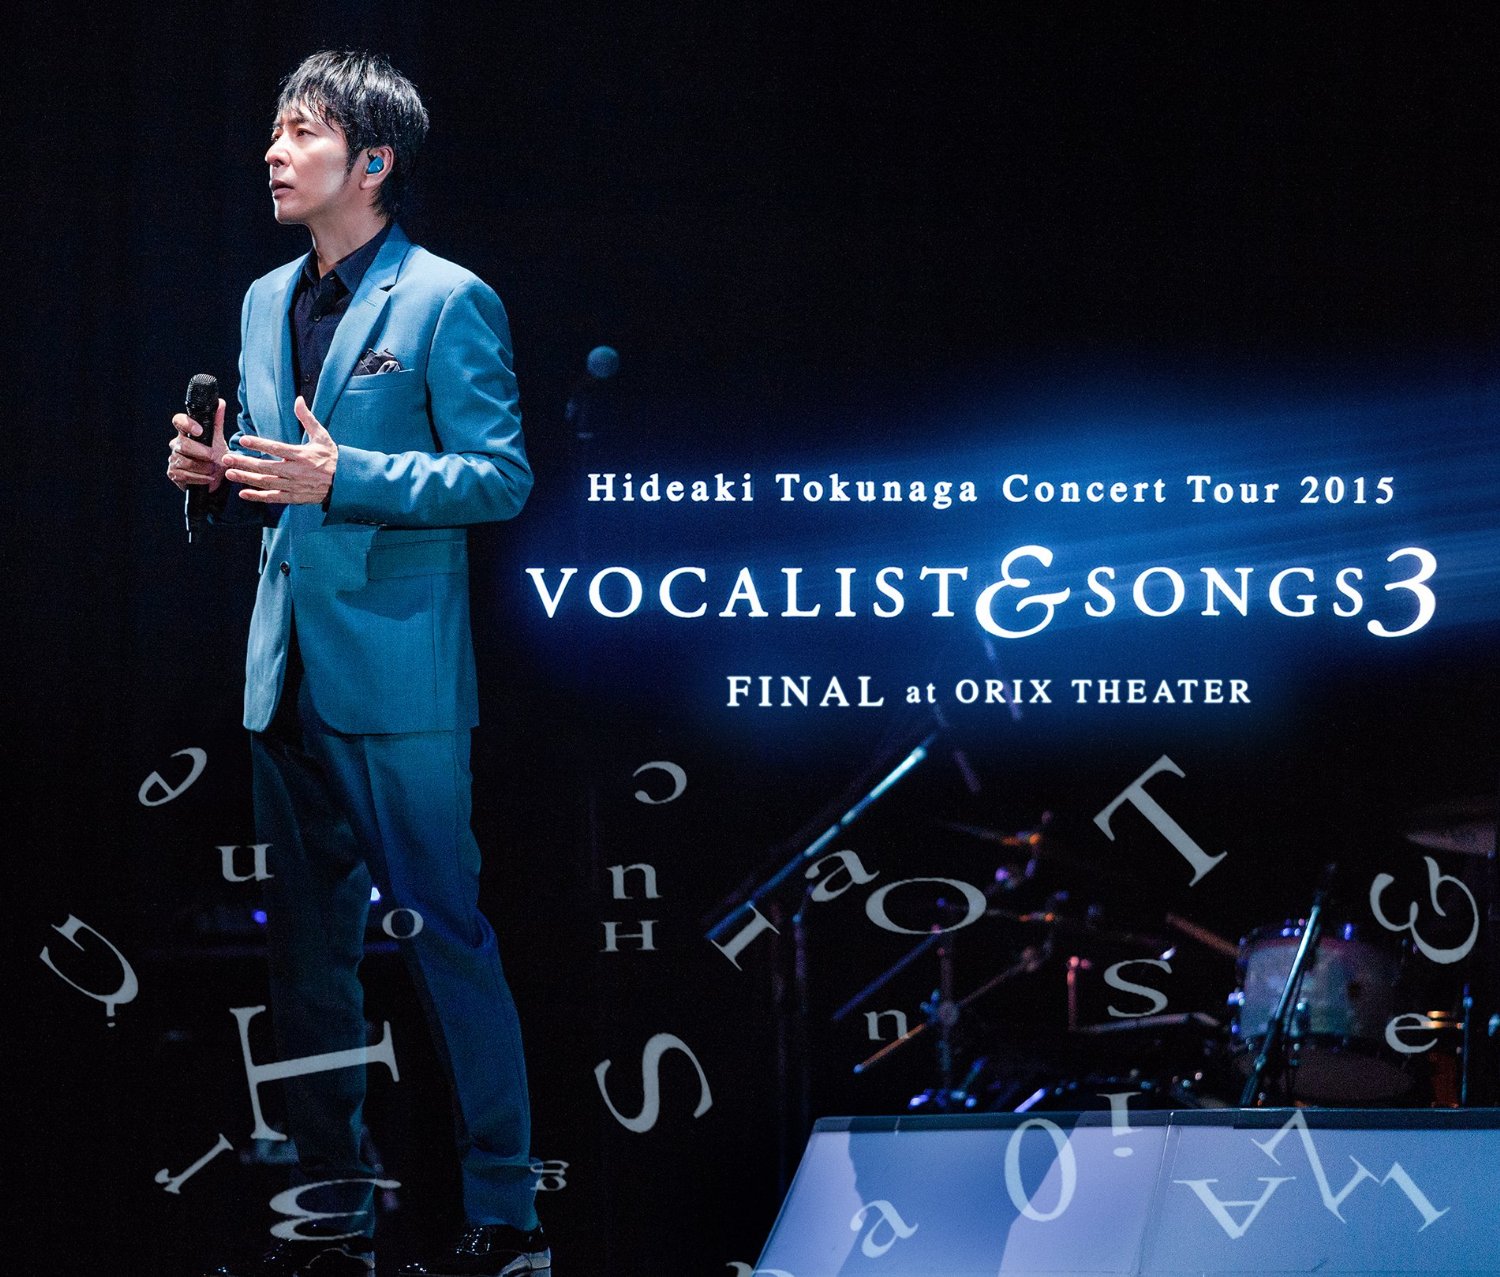 Concert Tour 2015 VOCALIST & SONGS 3 FINAL at ORIX THEATER(初回限定盤)